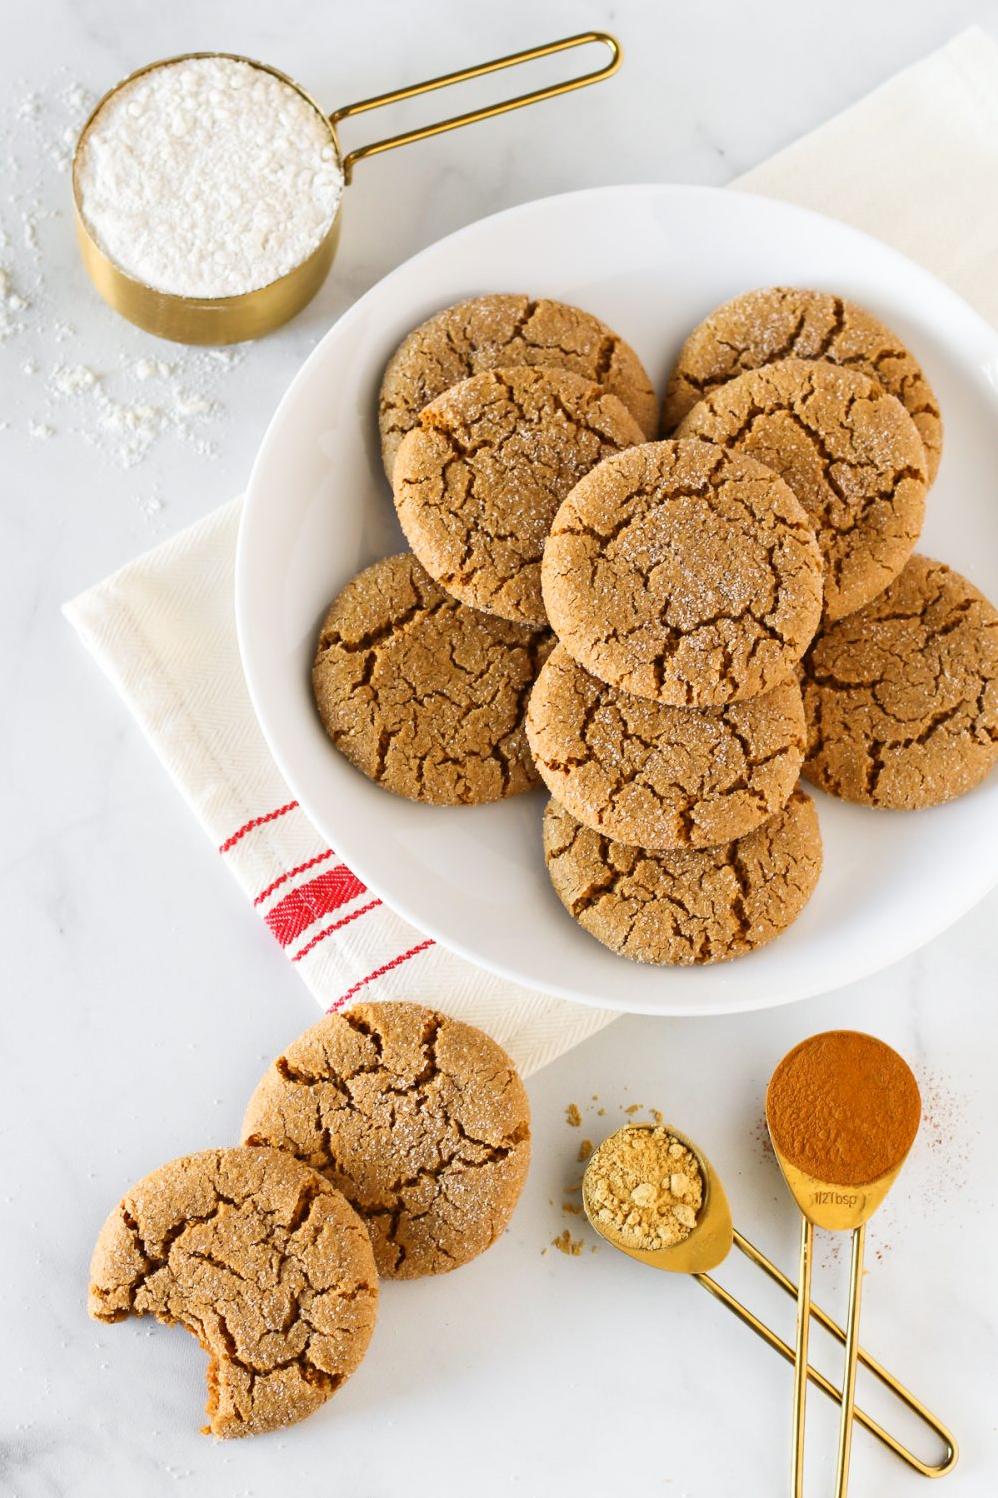  These cookies have all the flavors of a classic gingerbread cookie without any gluten or dairy.